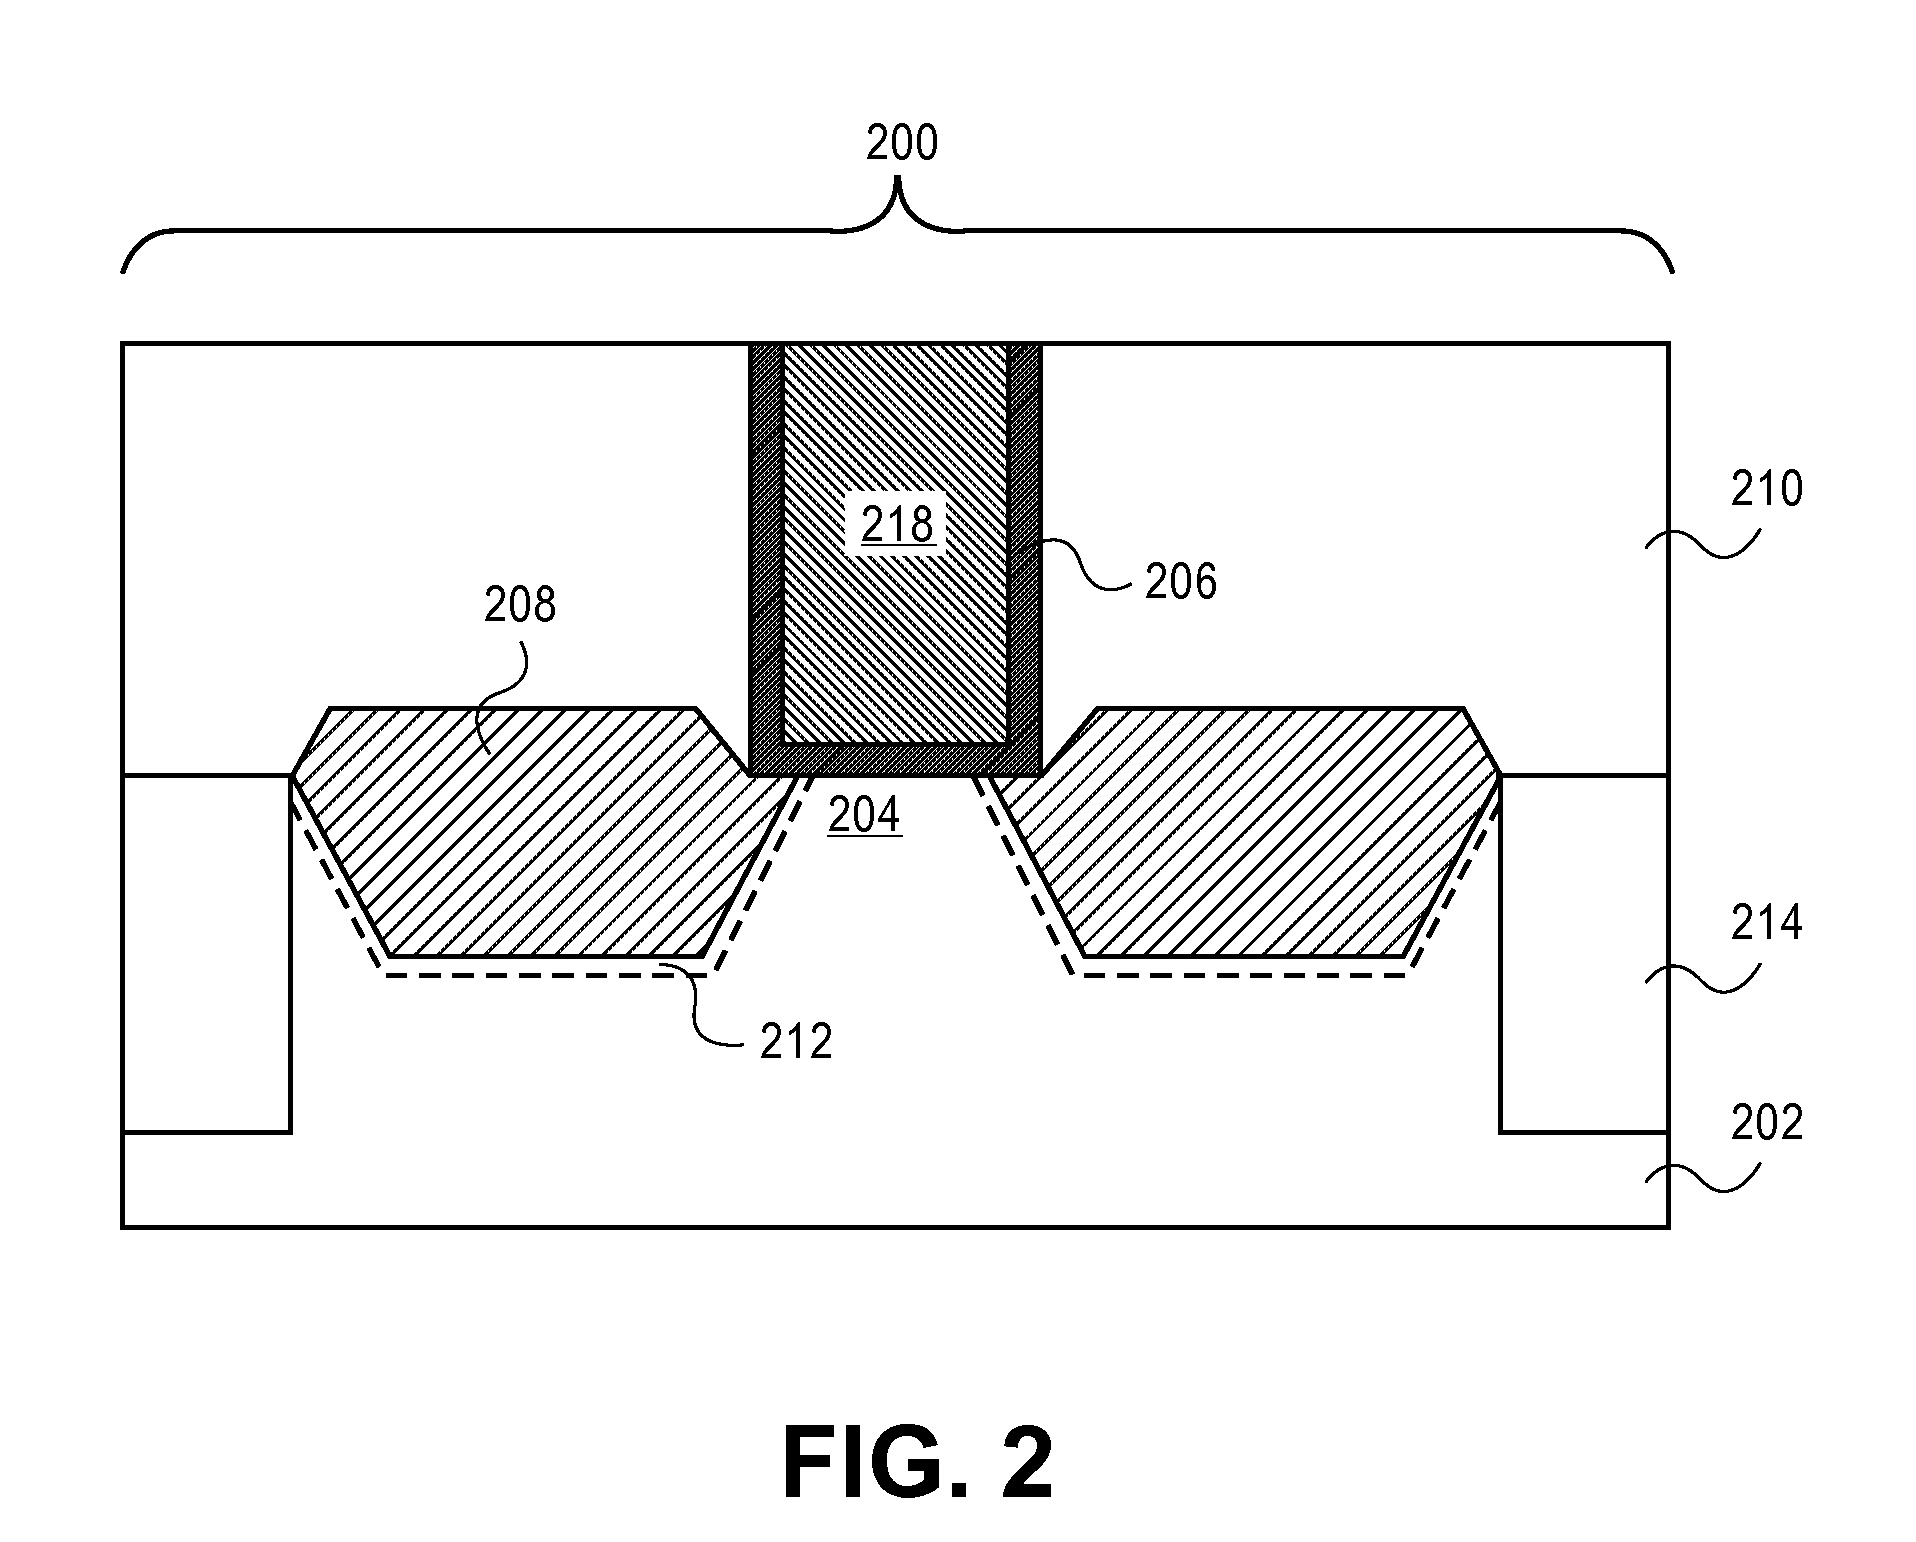 Semiconductor device having tipless epitaxial source/drain regions